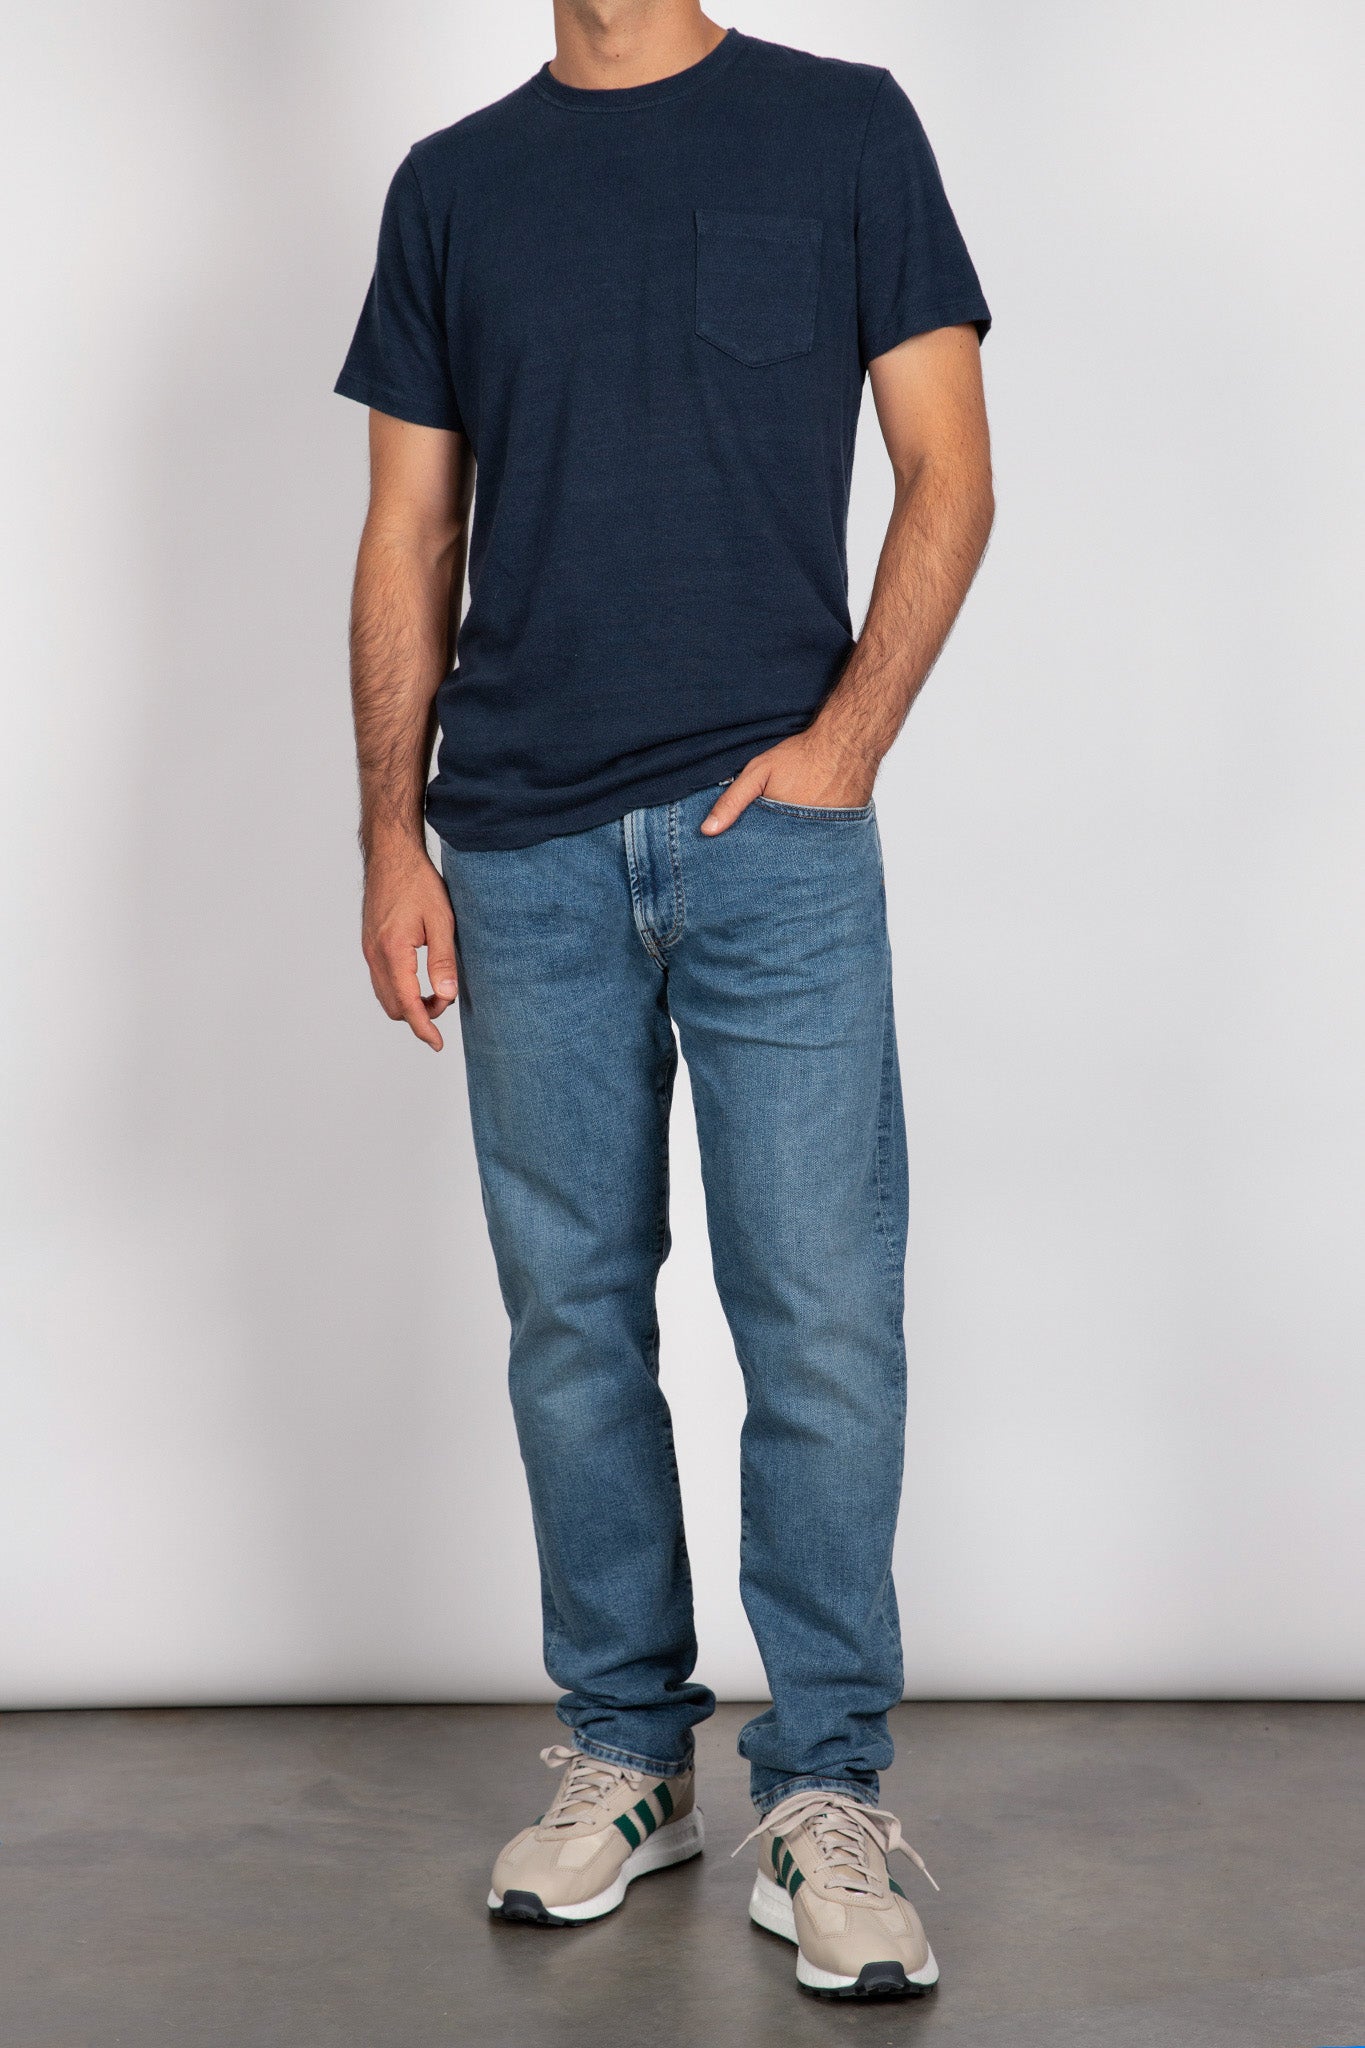 Adler Tapered Classic Perform Denim Citizens of Humanity   